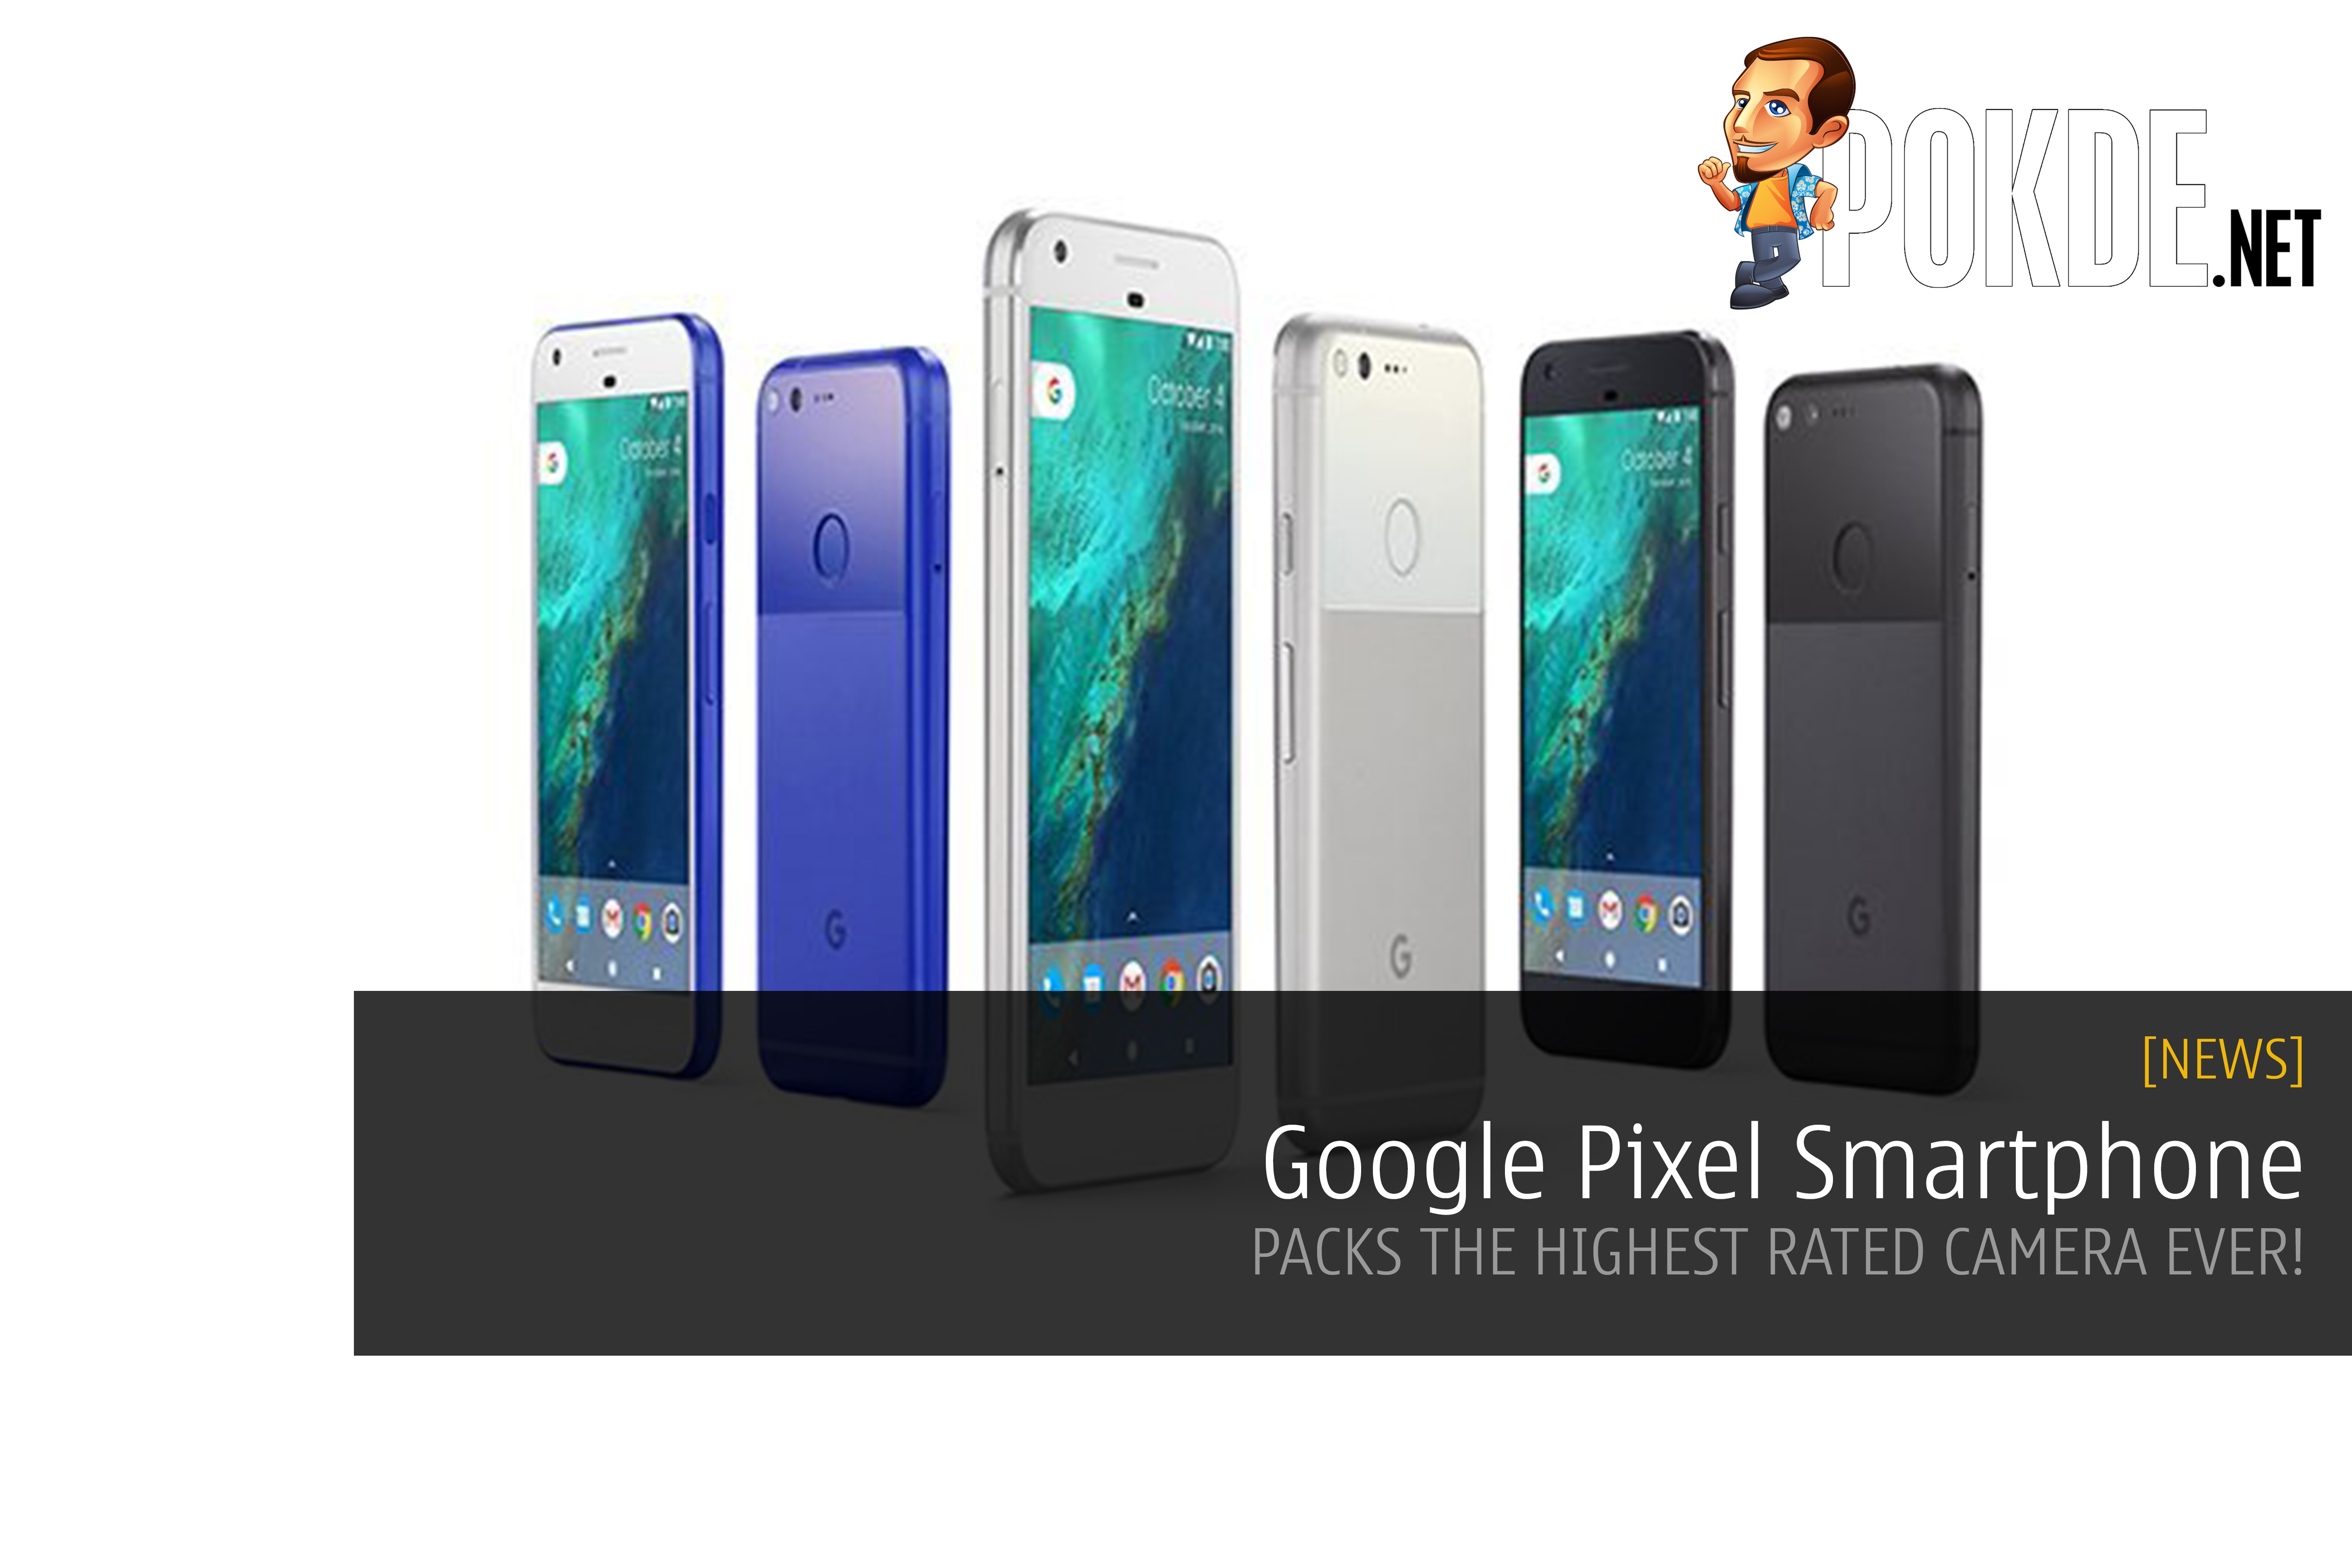 Google Pixel smartphone "made by Google" packs the highest rated camera ever 27